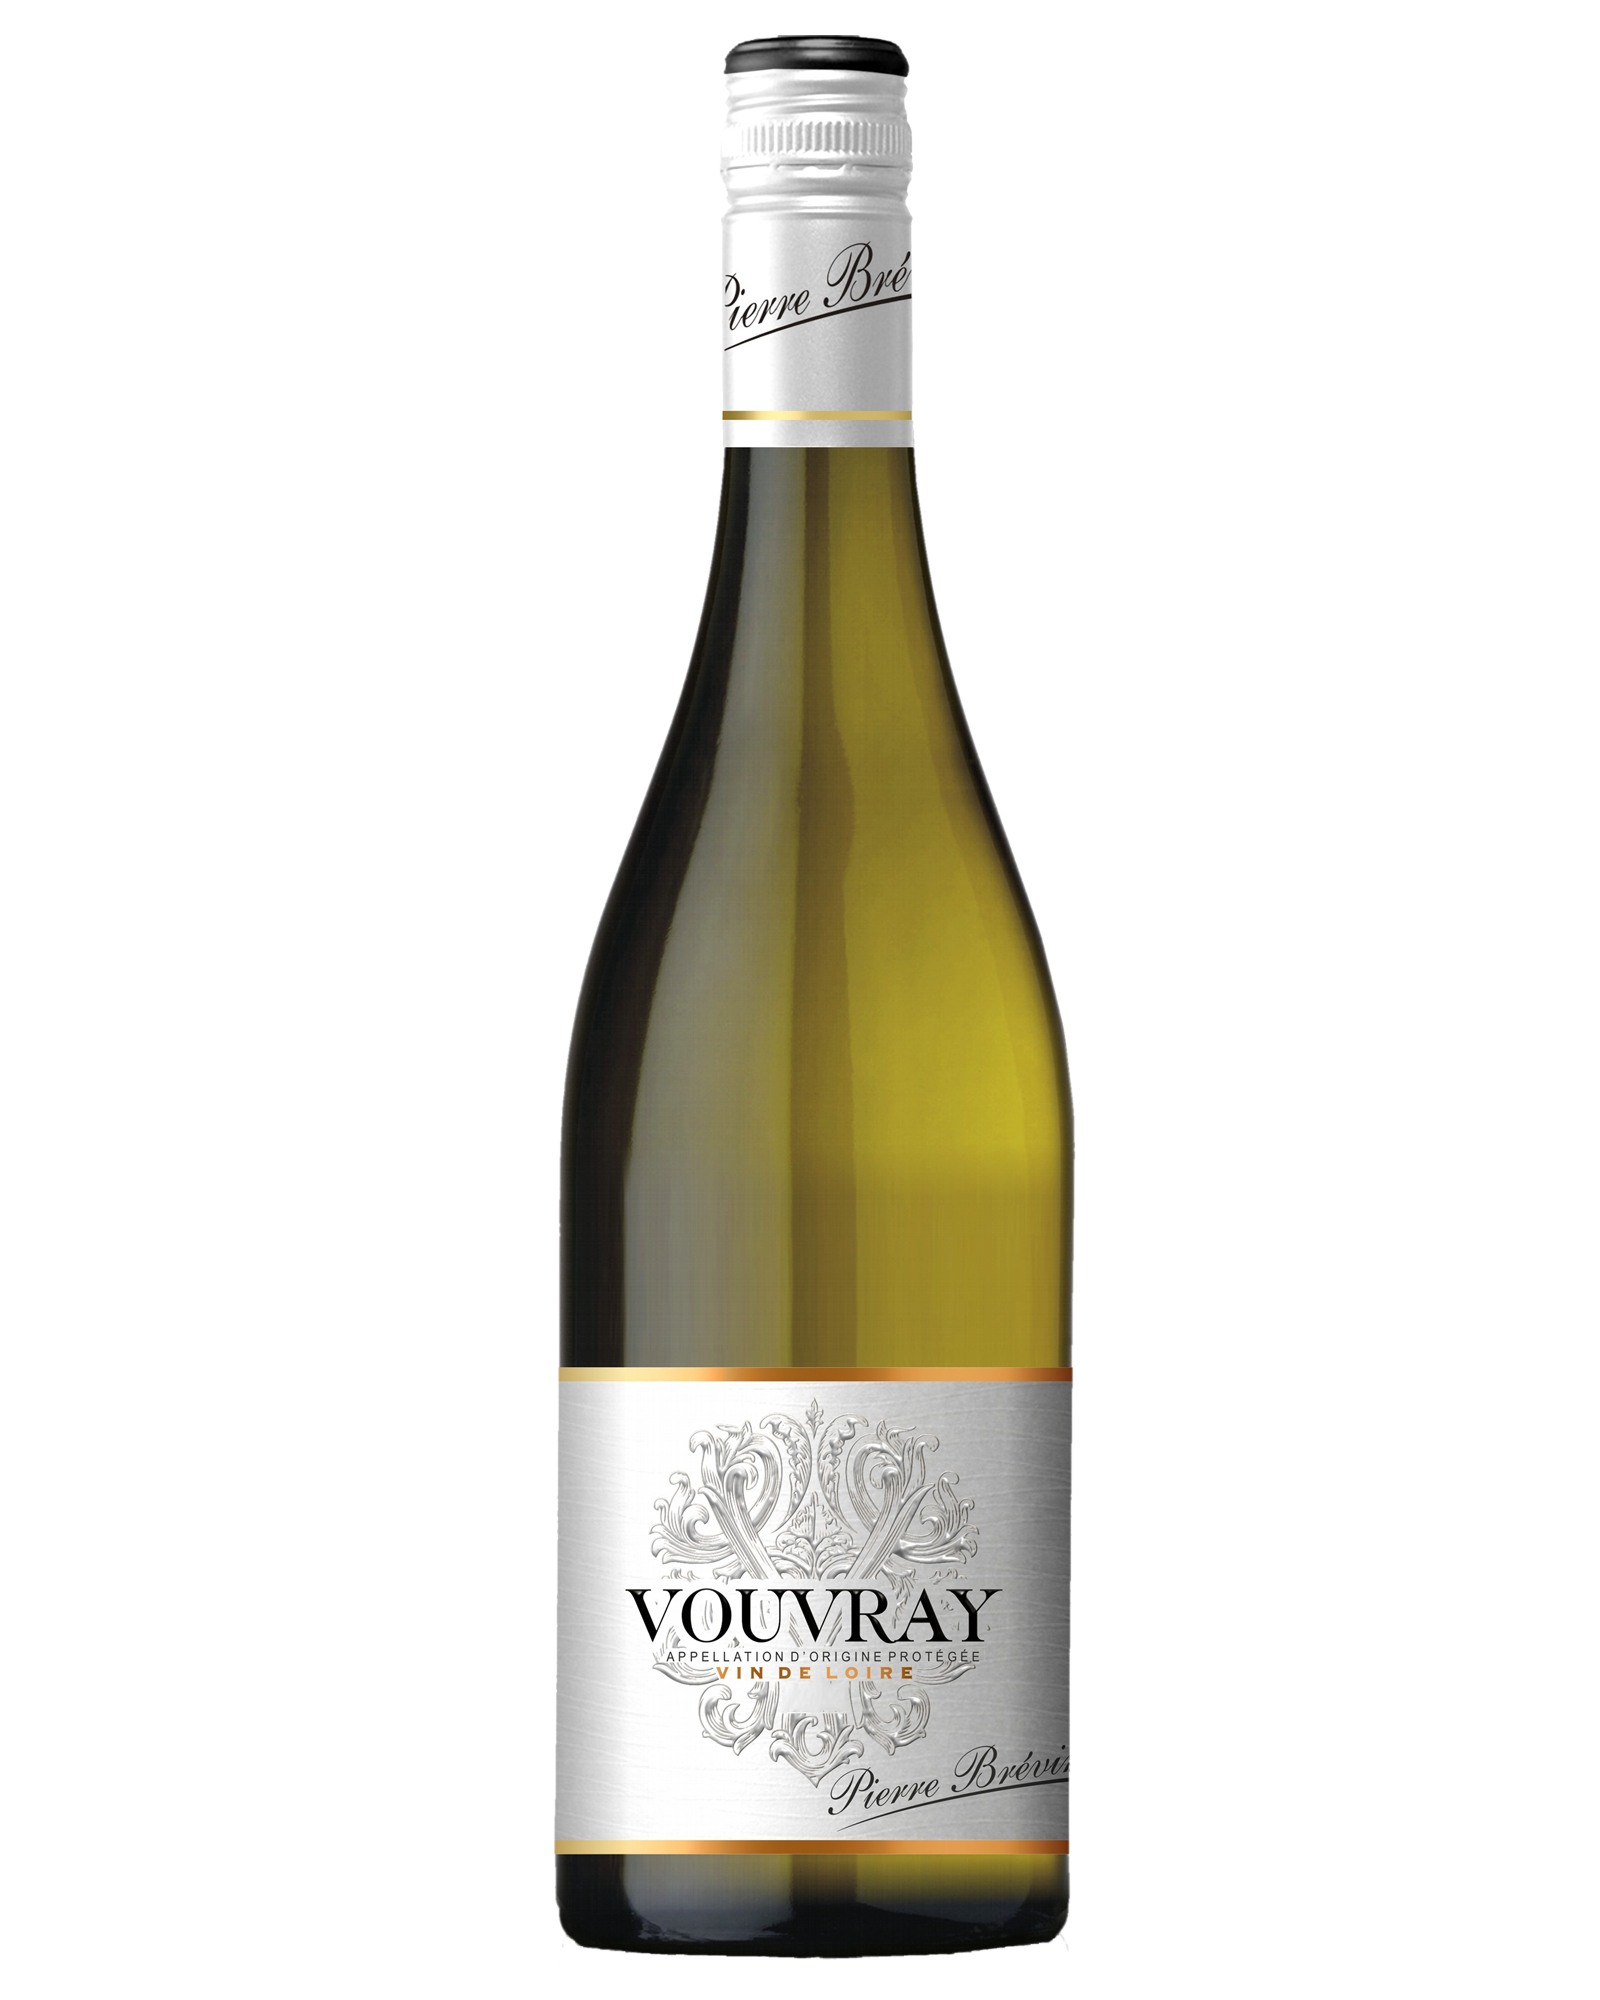 Pierre Brevin Vouvray